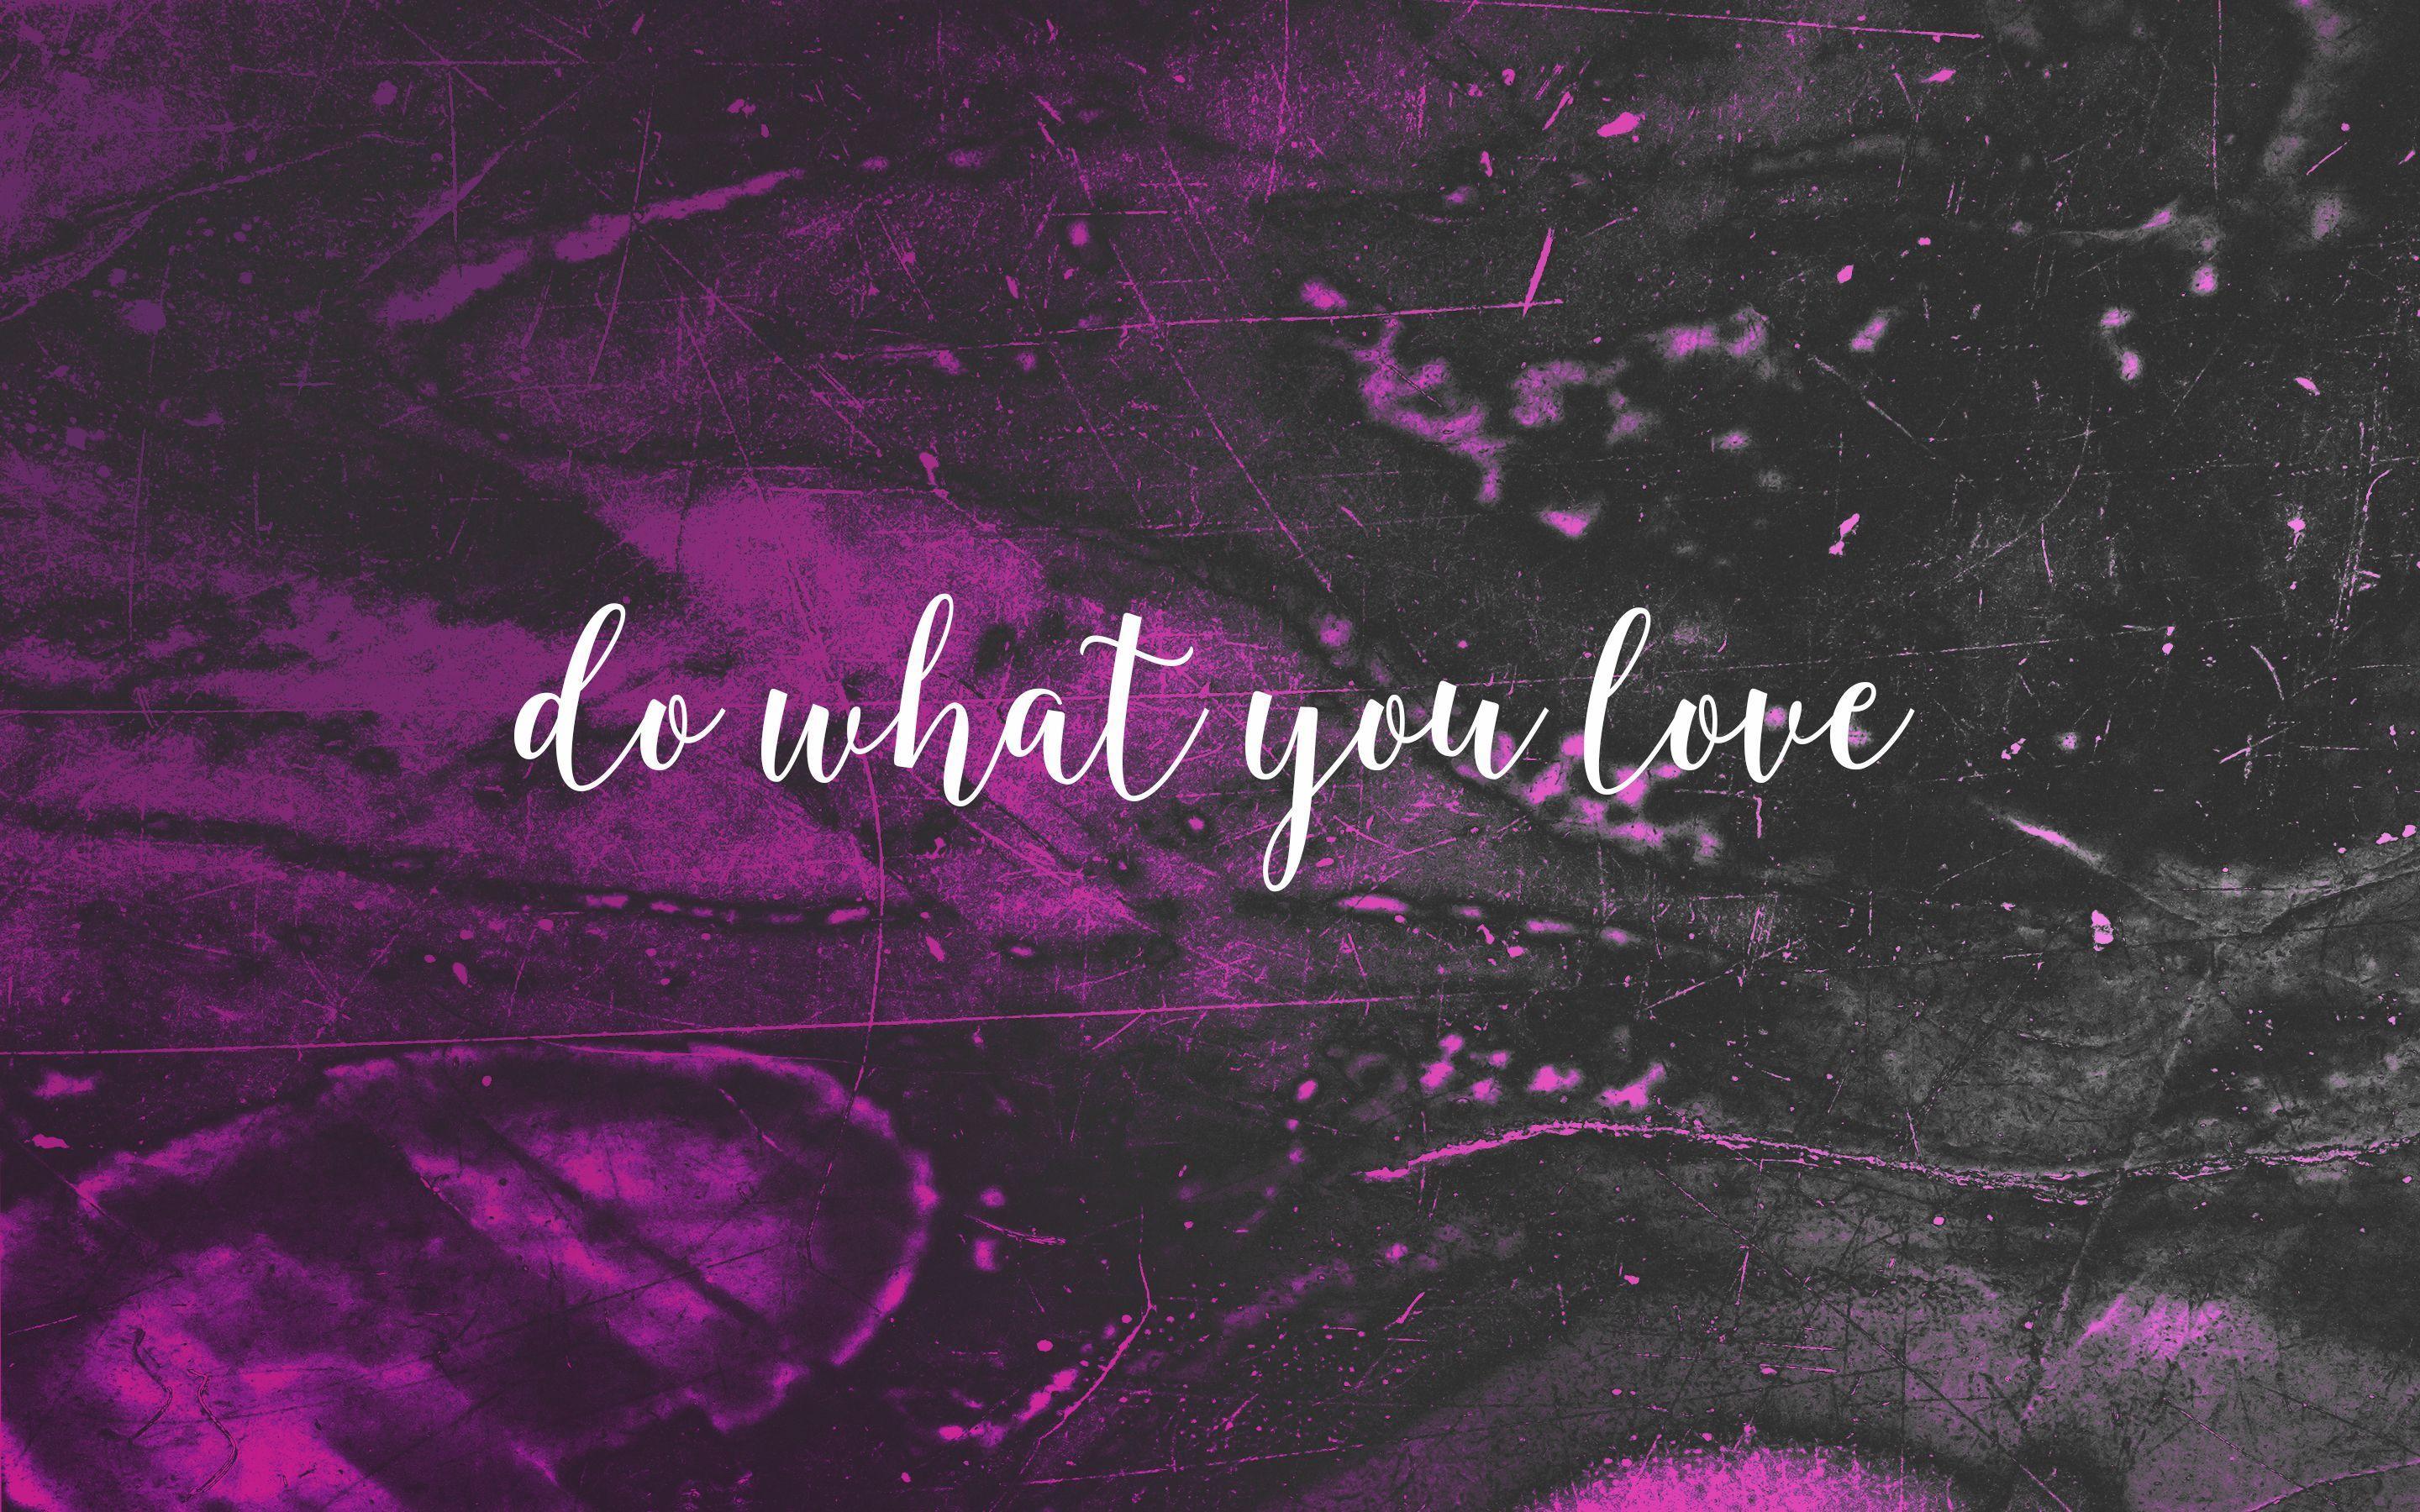 Do What You Love Wallpapers - Top Free Do What You Love Backgrounds -  WallpaperAccess